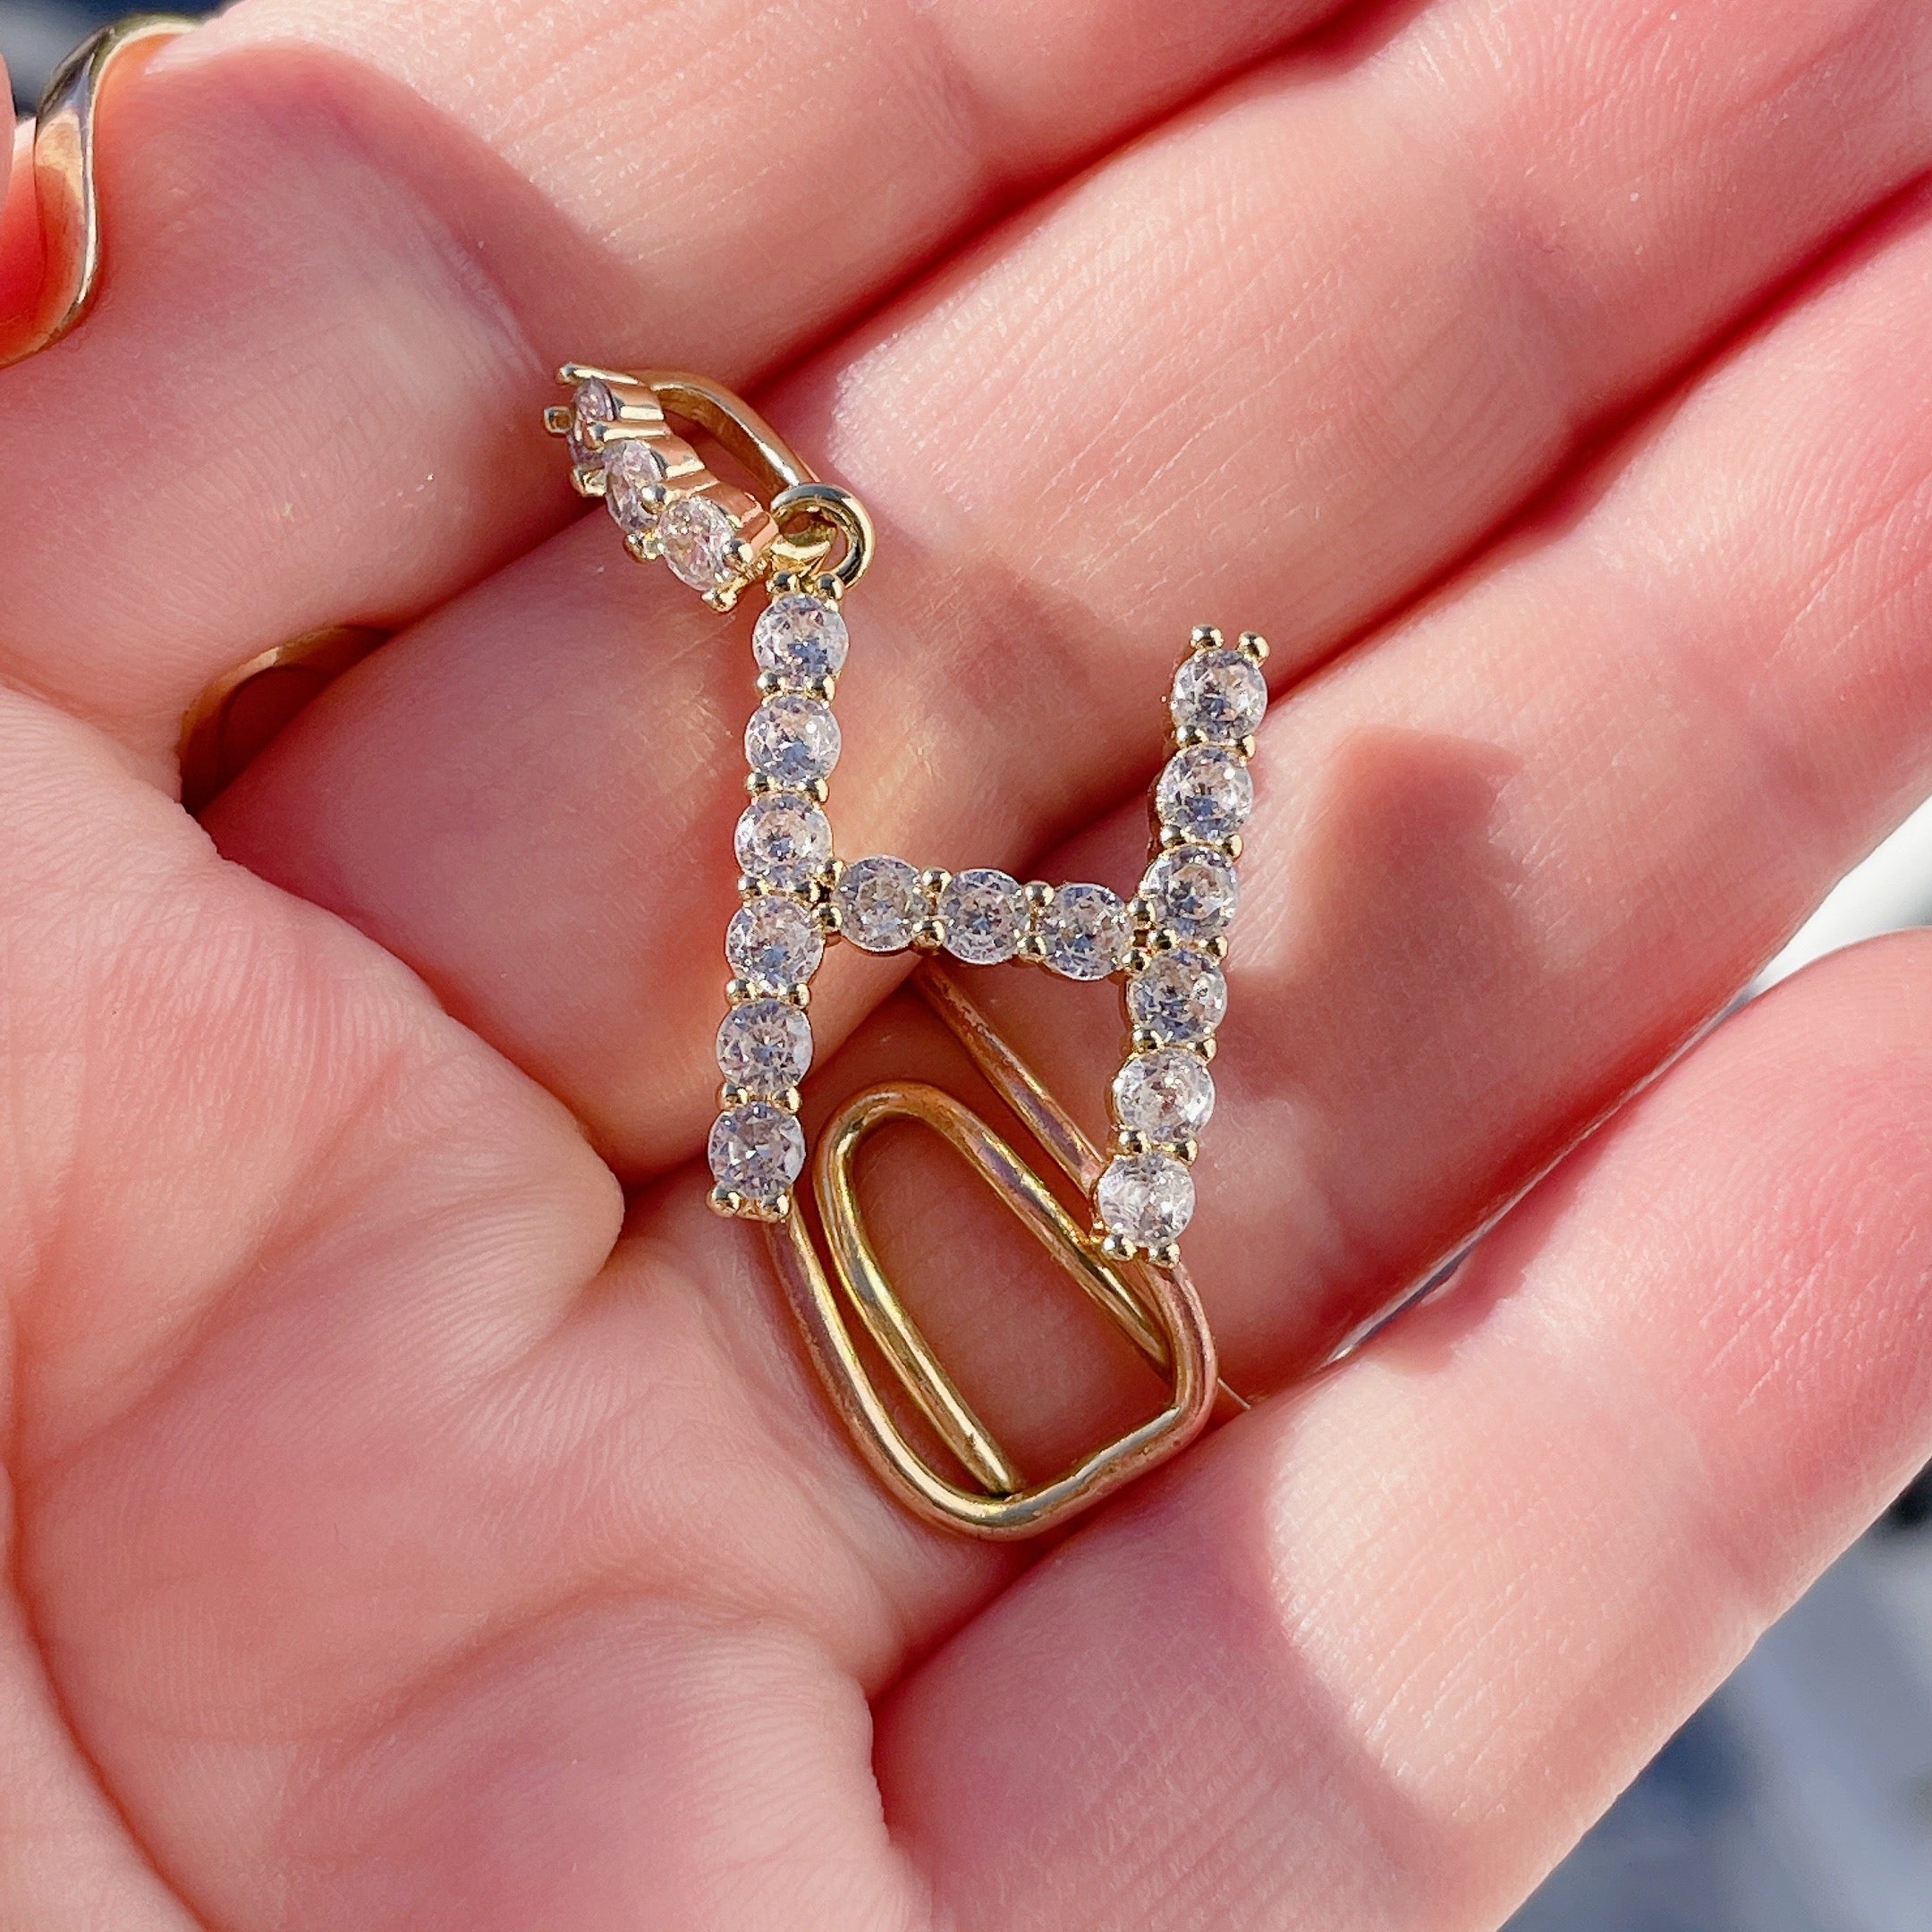 A-Z INITIAL LETTER CZ Charm | Gold